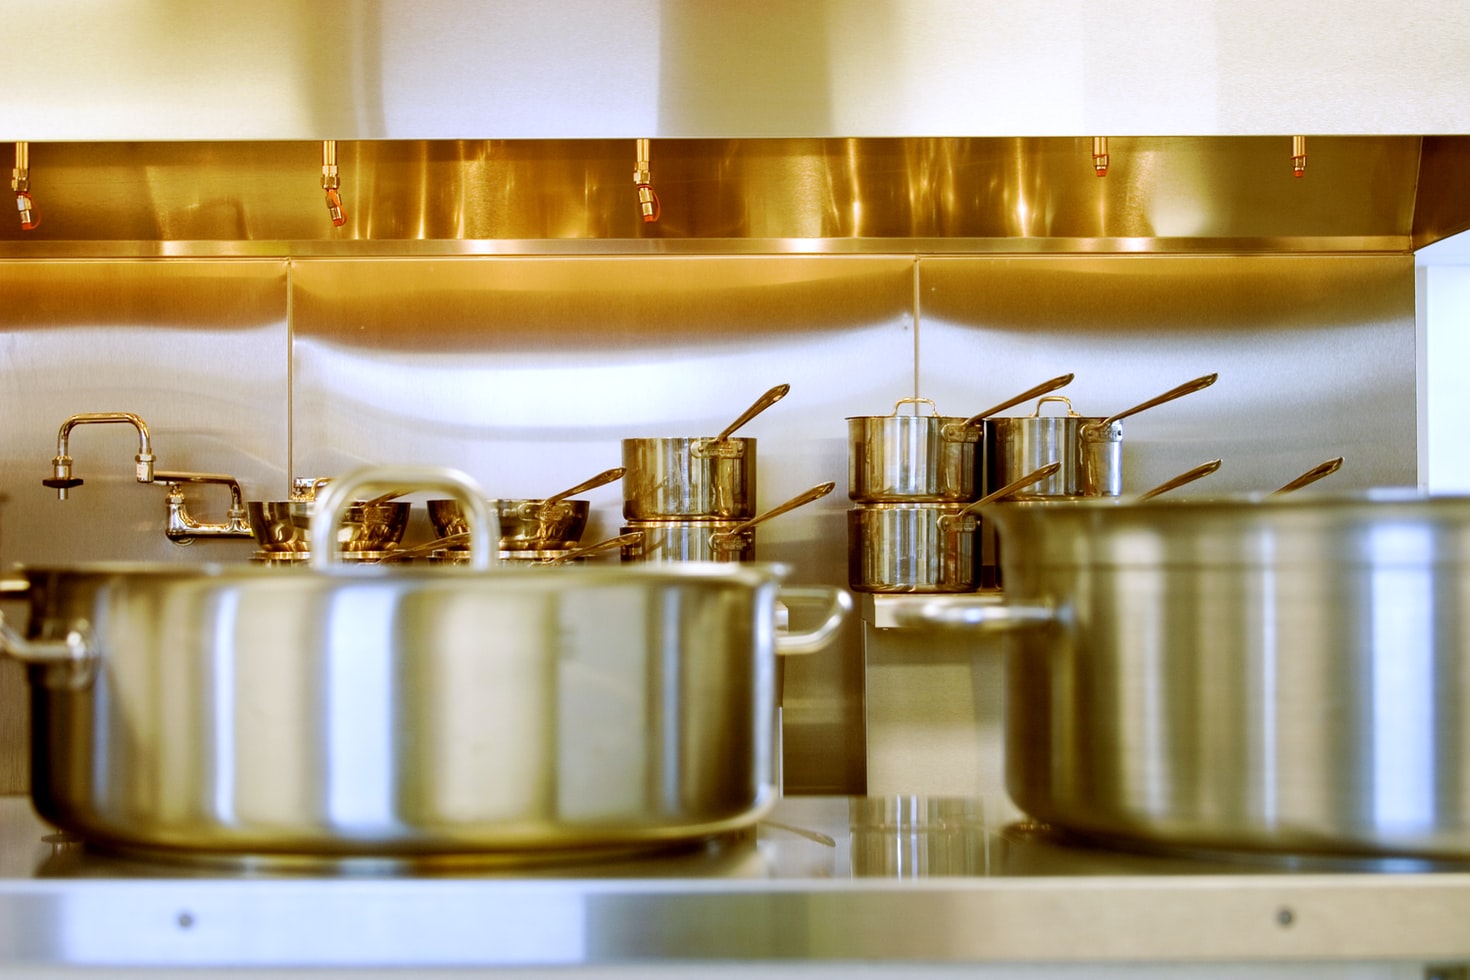 There are several things to consider when purchasing new commercial kitchen equipment